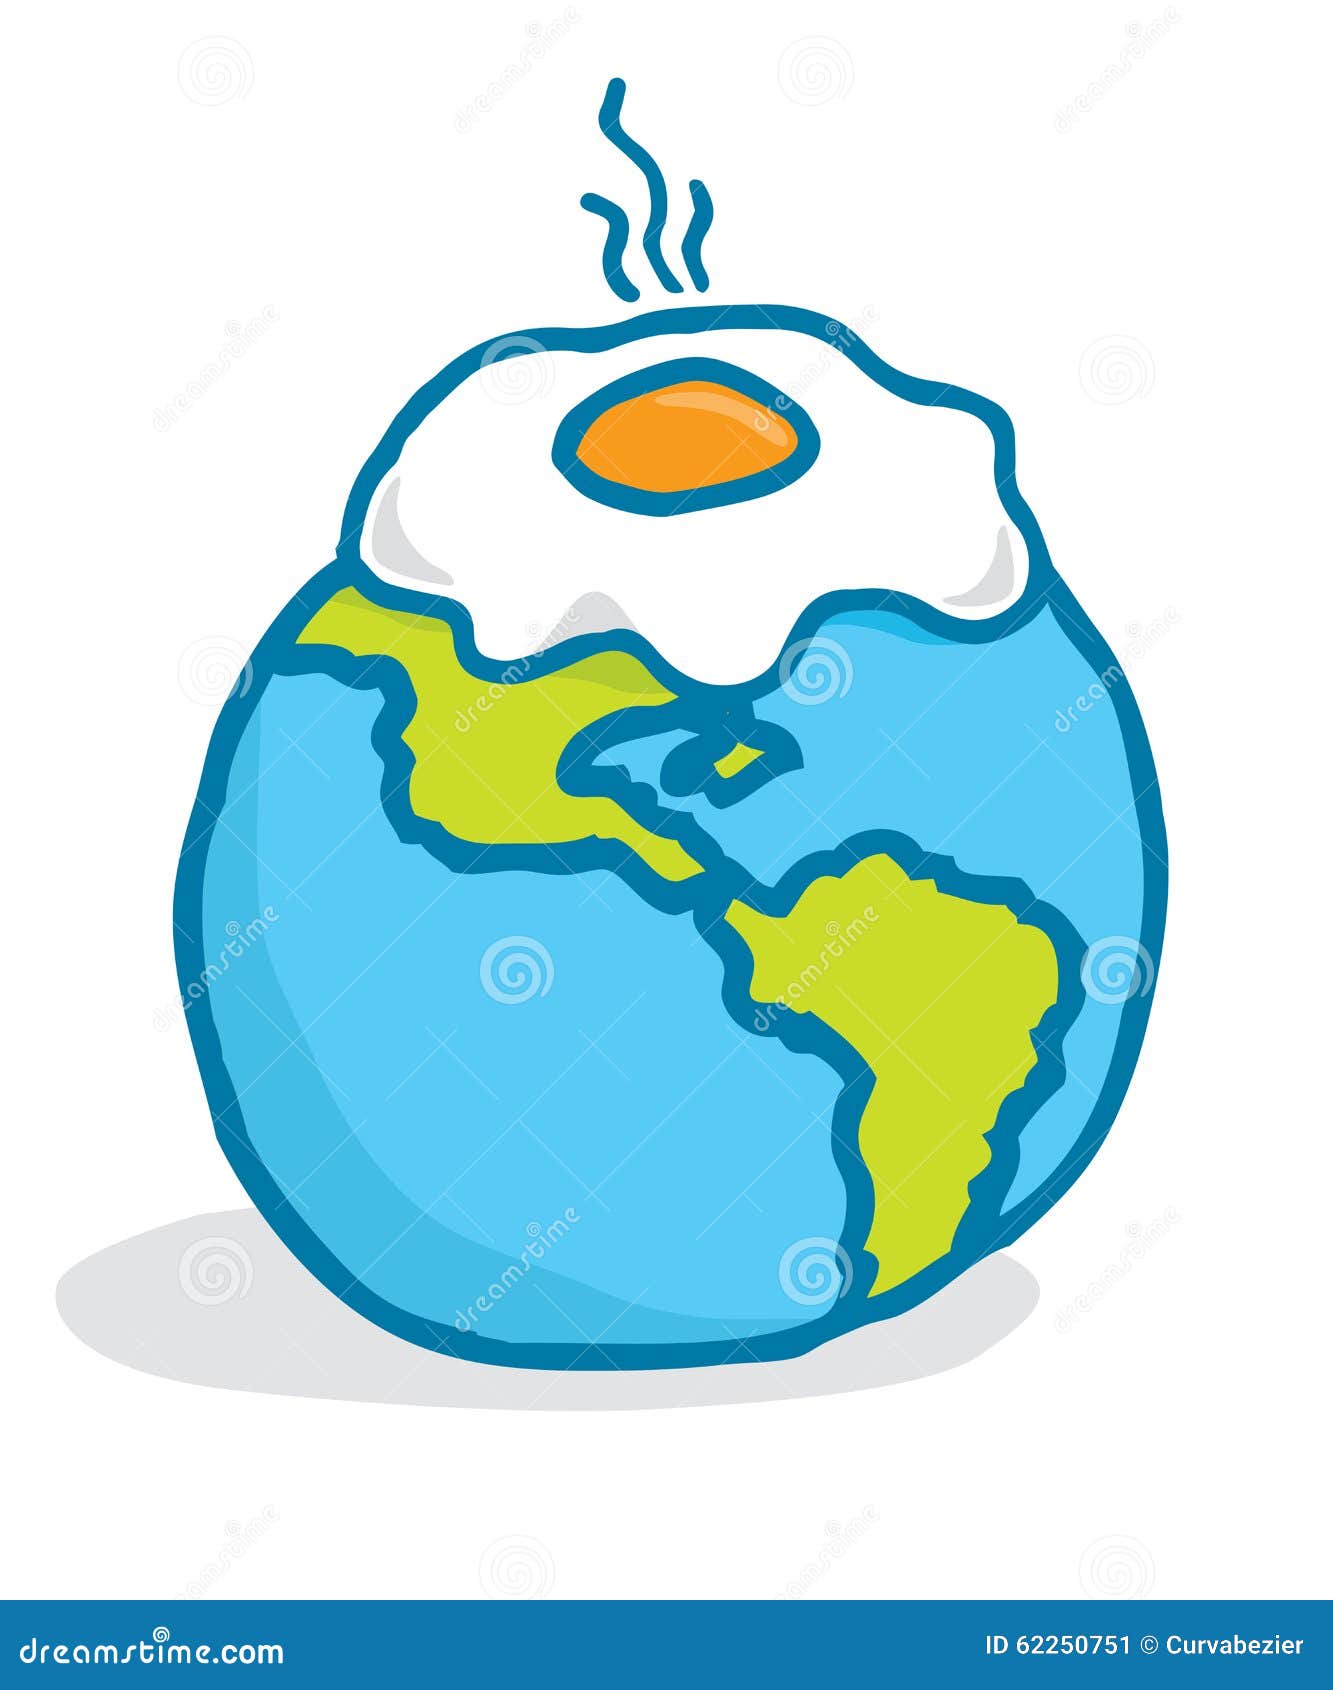 global warming clipart - photo #17